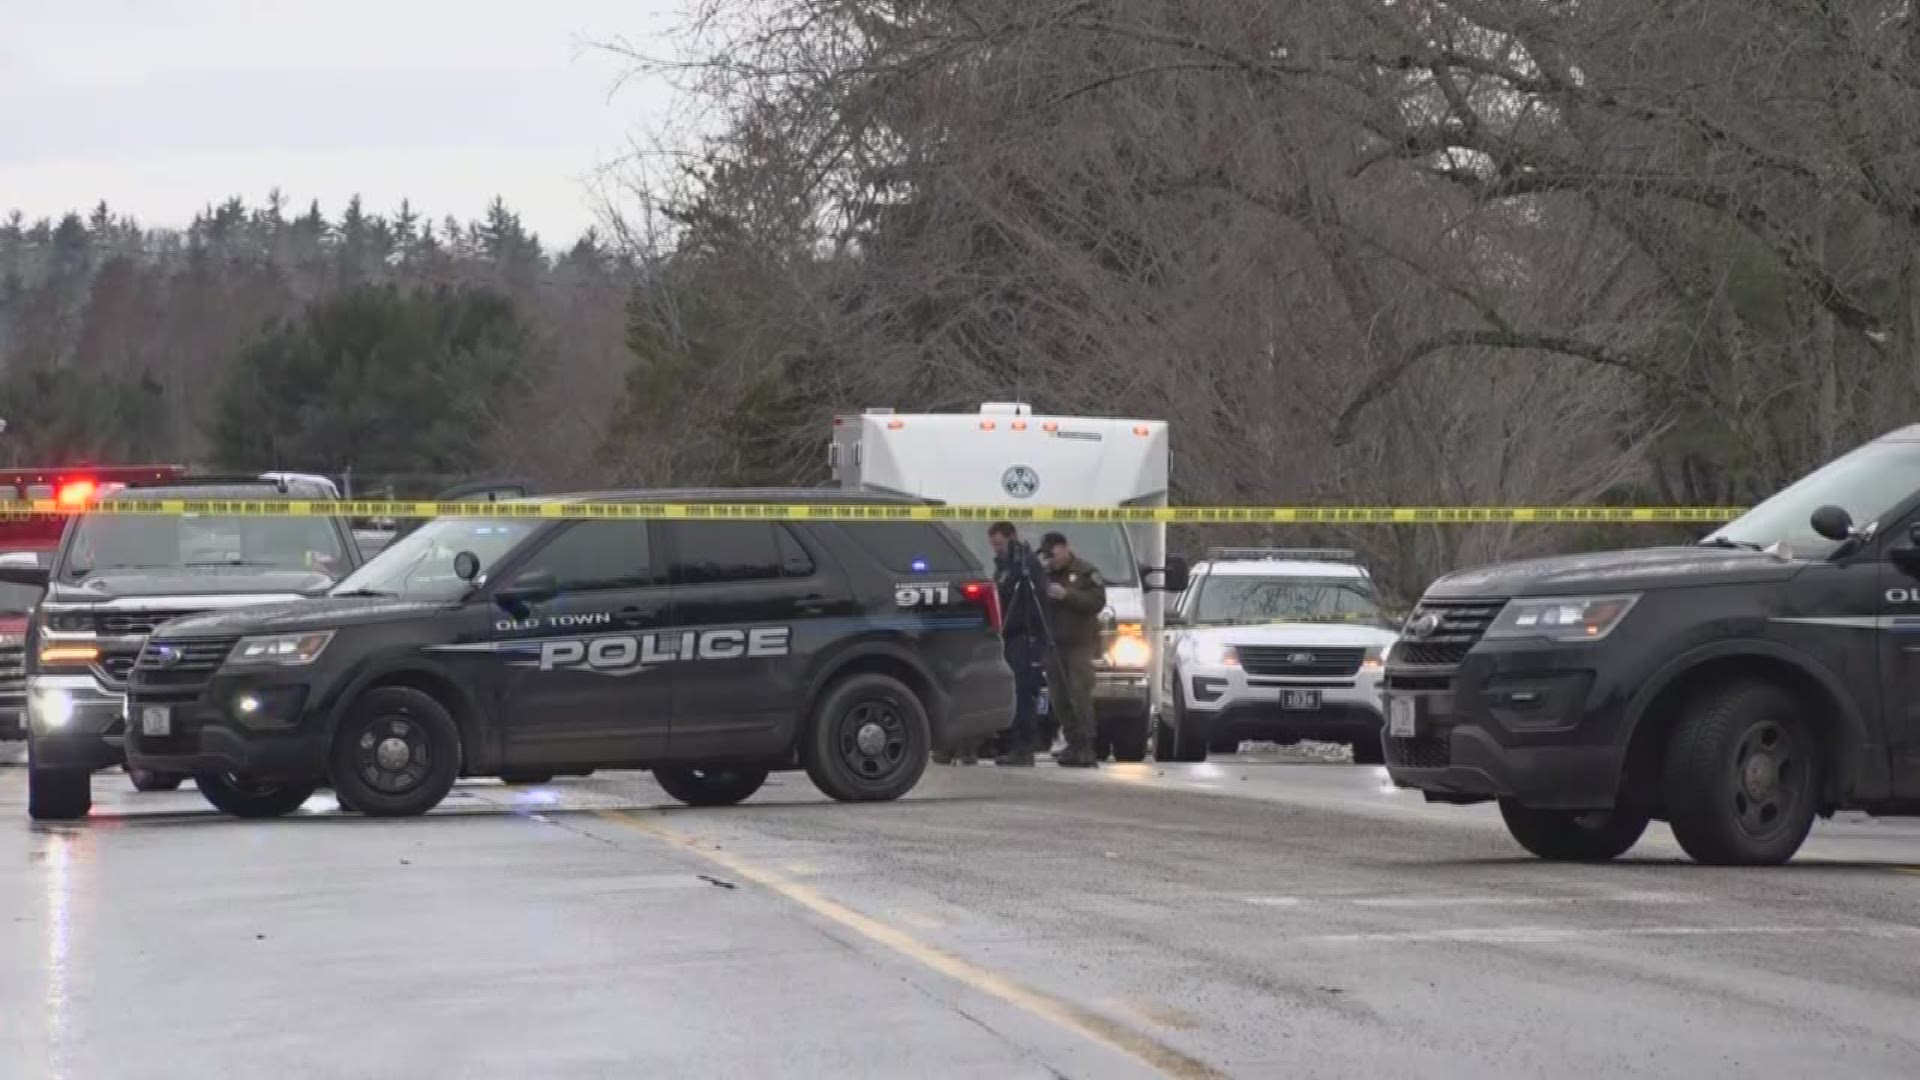 A man from New Hampshire was shot and killed by police early this morning in Old Town.